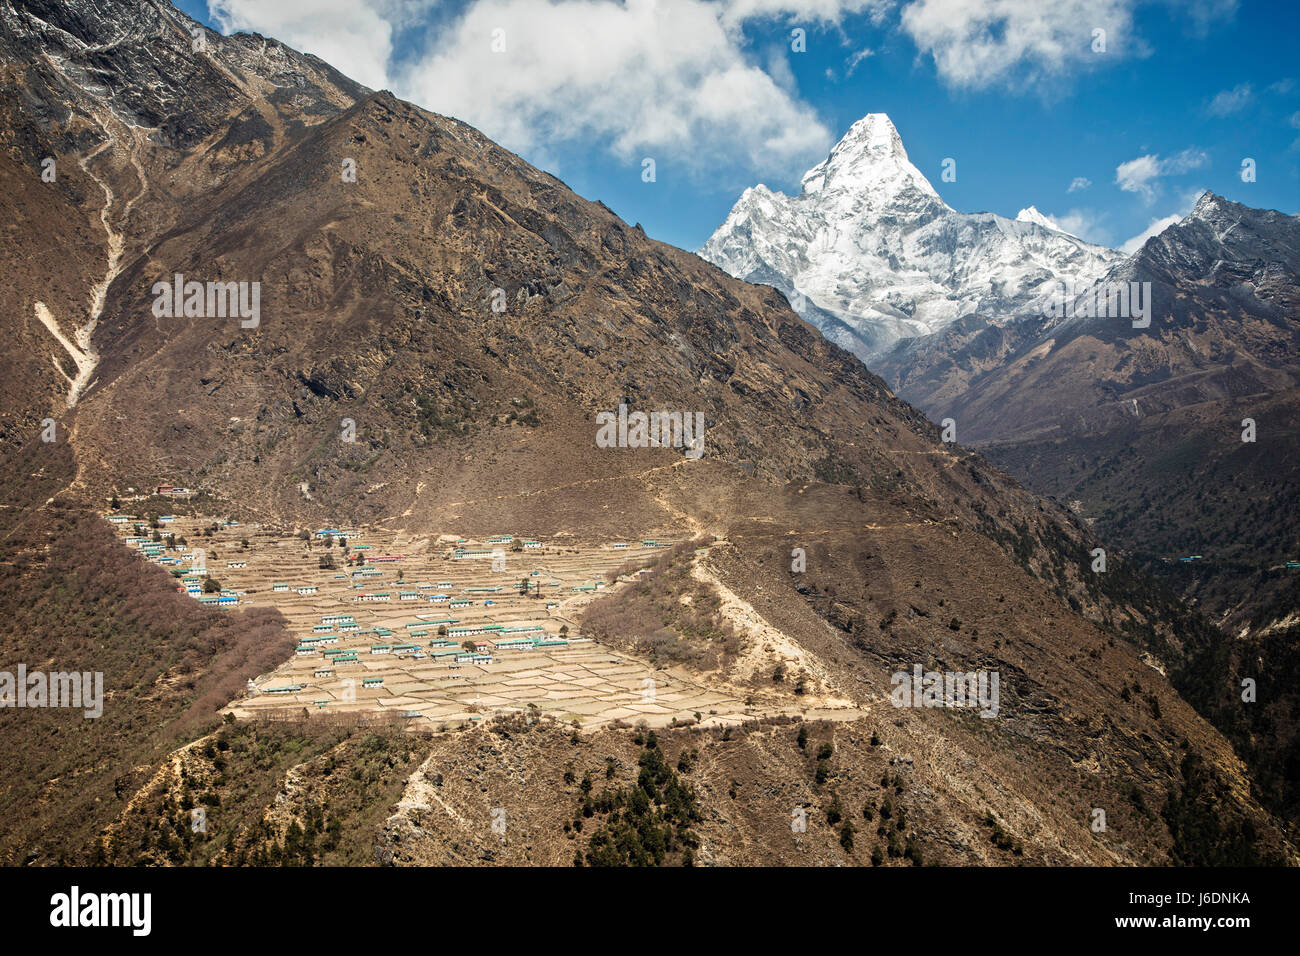 The village of Phortse on a mountainside with Ama Dablam (6856 meters) in the background.  Sagarmatha National Park, Nepal. Stock Photo